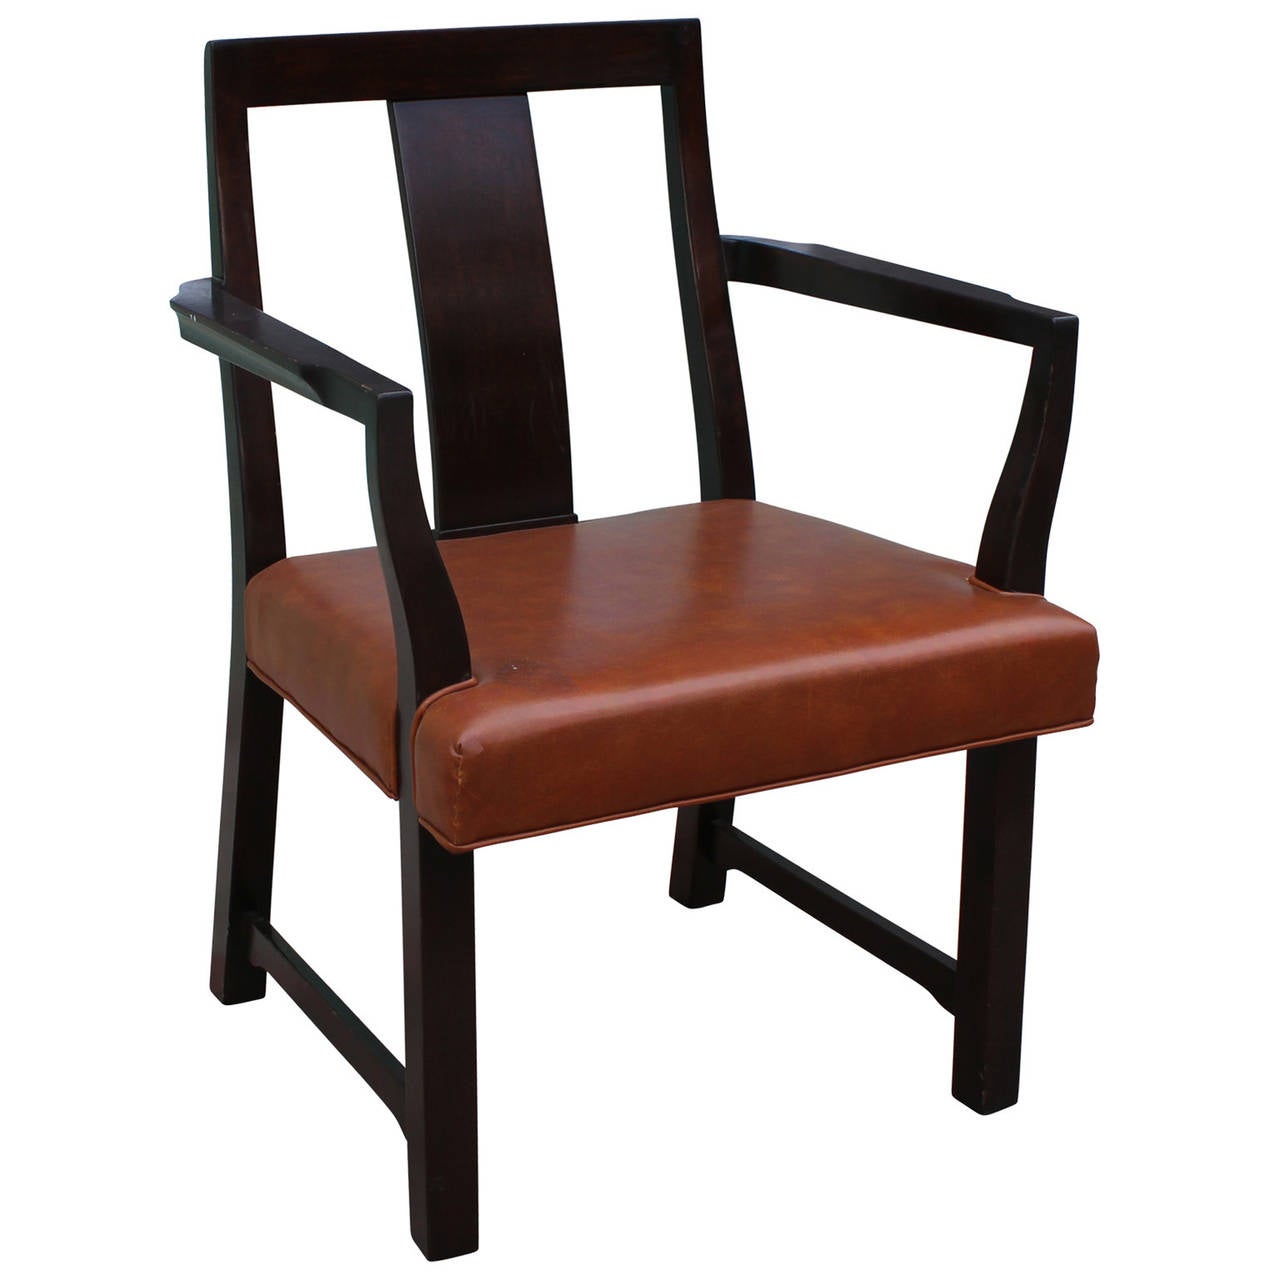 Pair of Edward Wormley for Dunbar dining chairs in dark mahogany with original leather upholstery. 